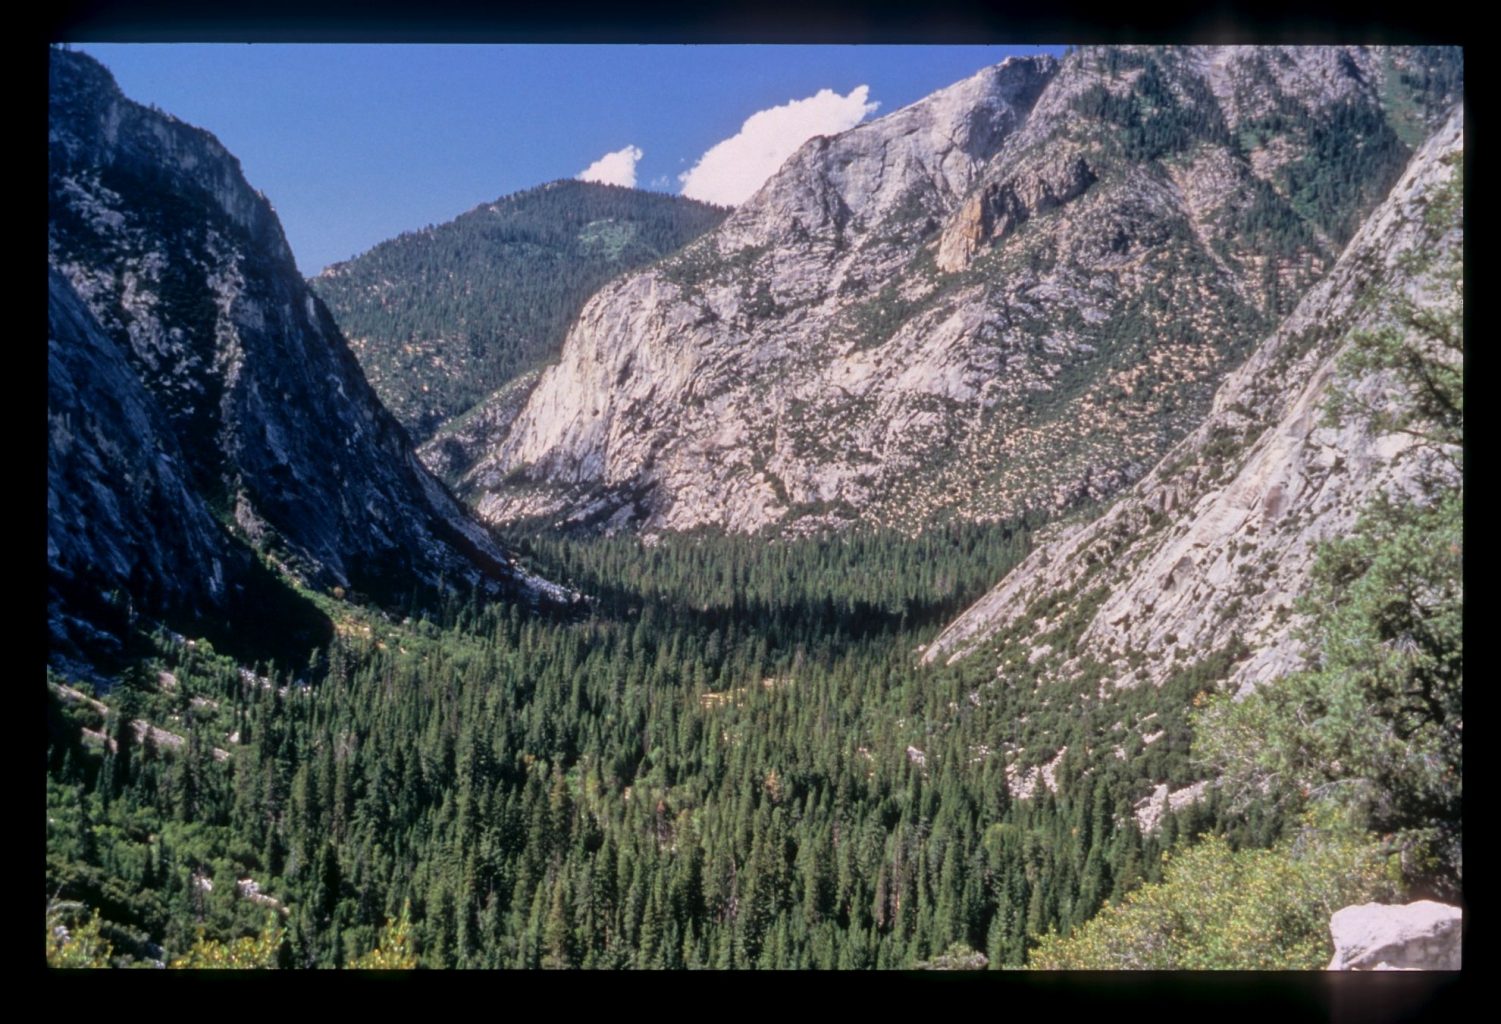 a view of the mountains and trees in the valley